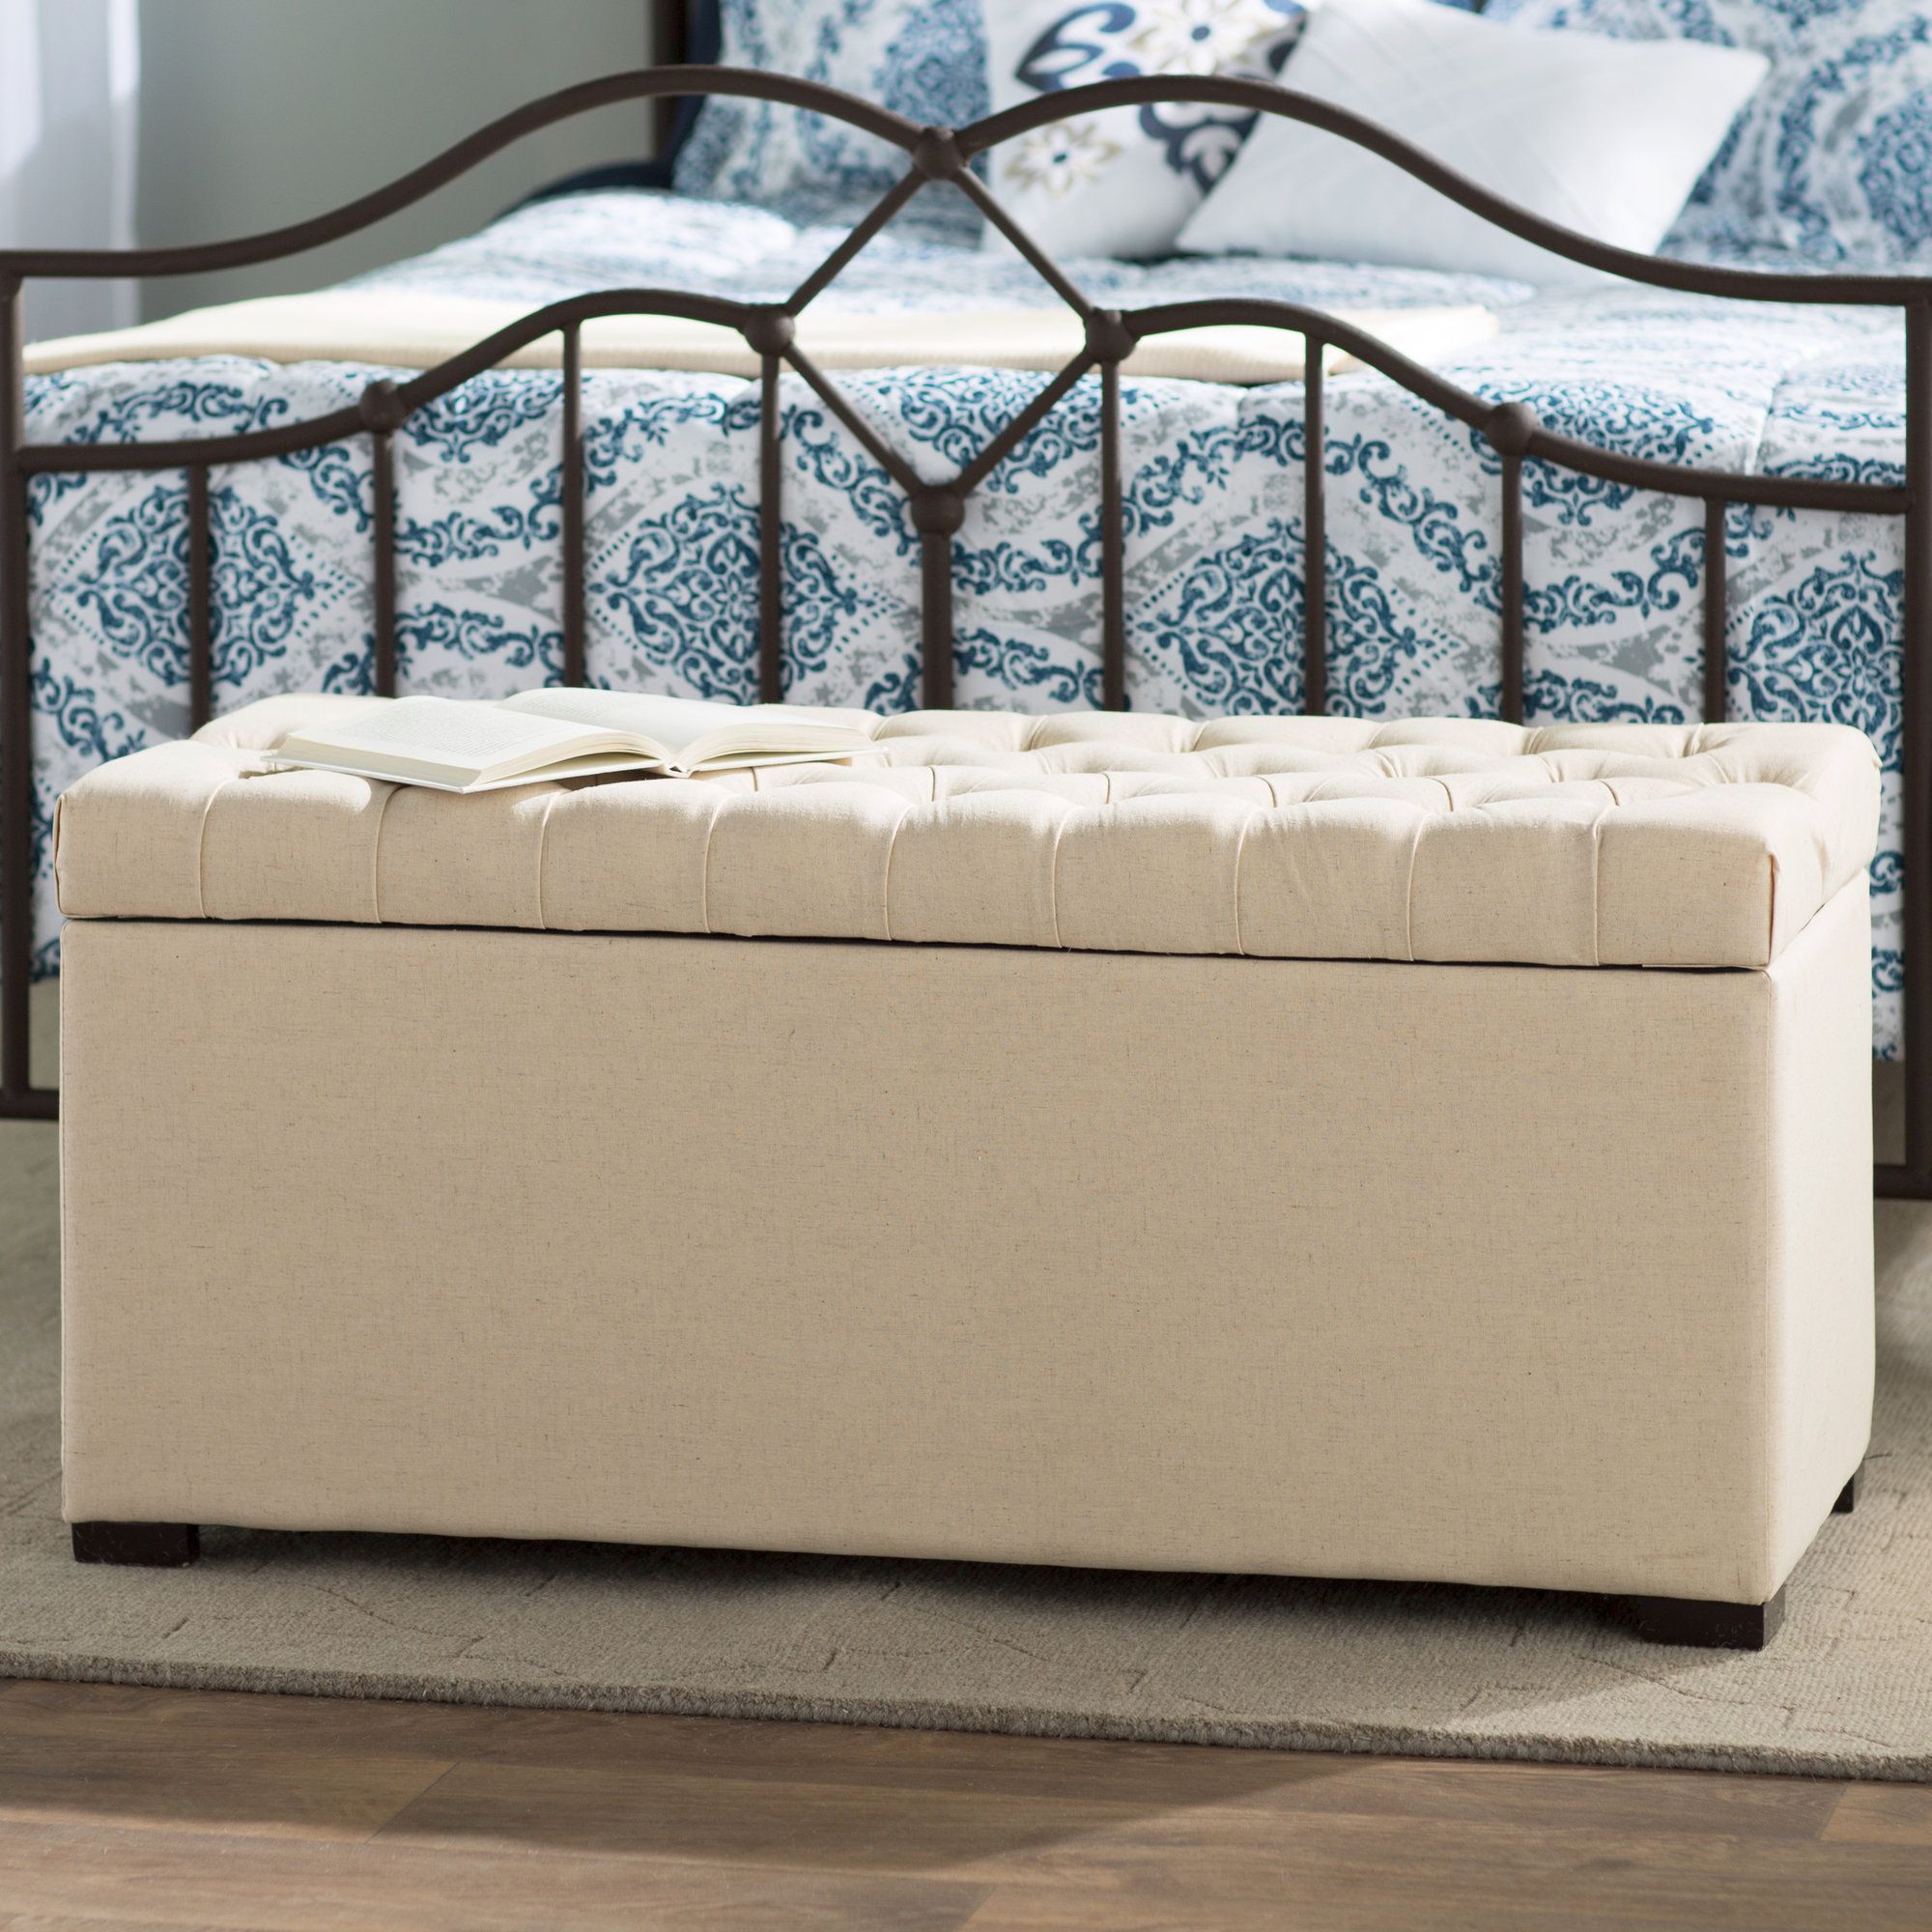 Bedroom Storage Bench: The Perfect Solution For Small Bedrooms